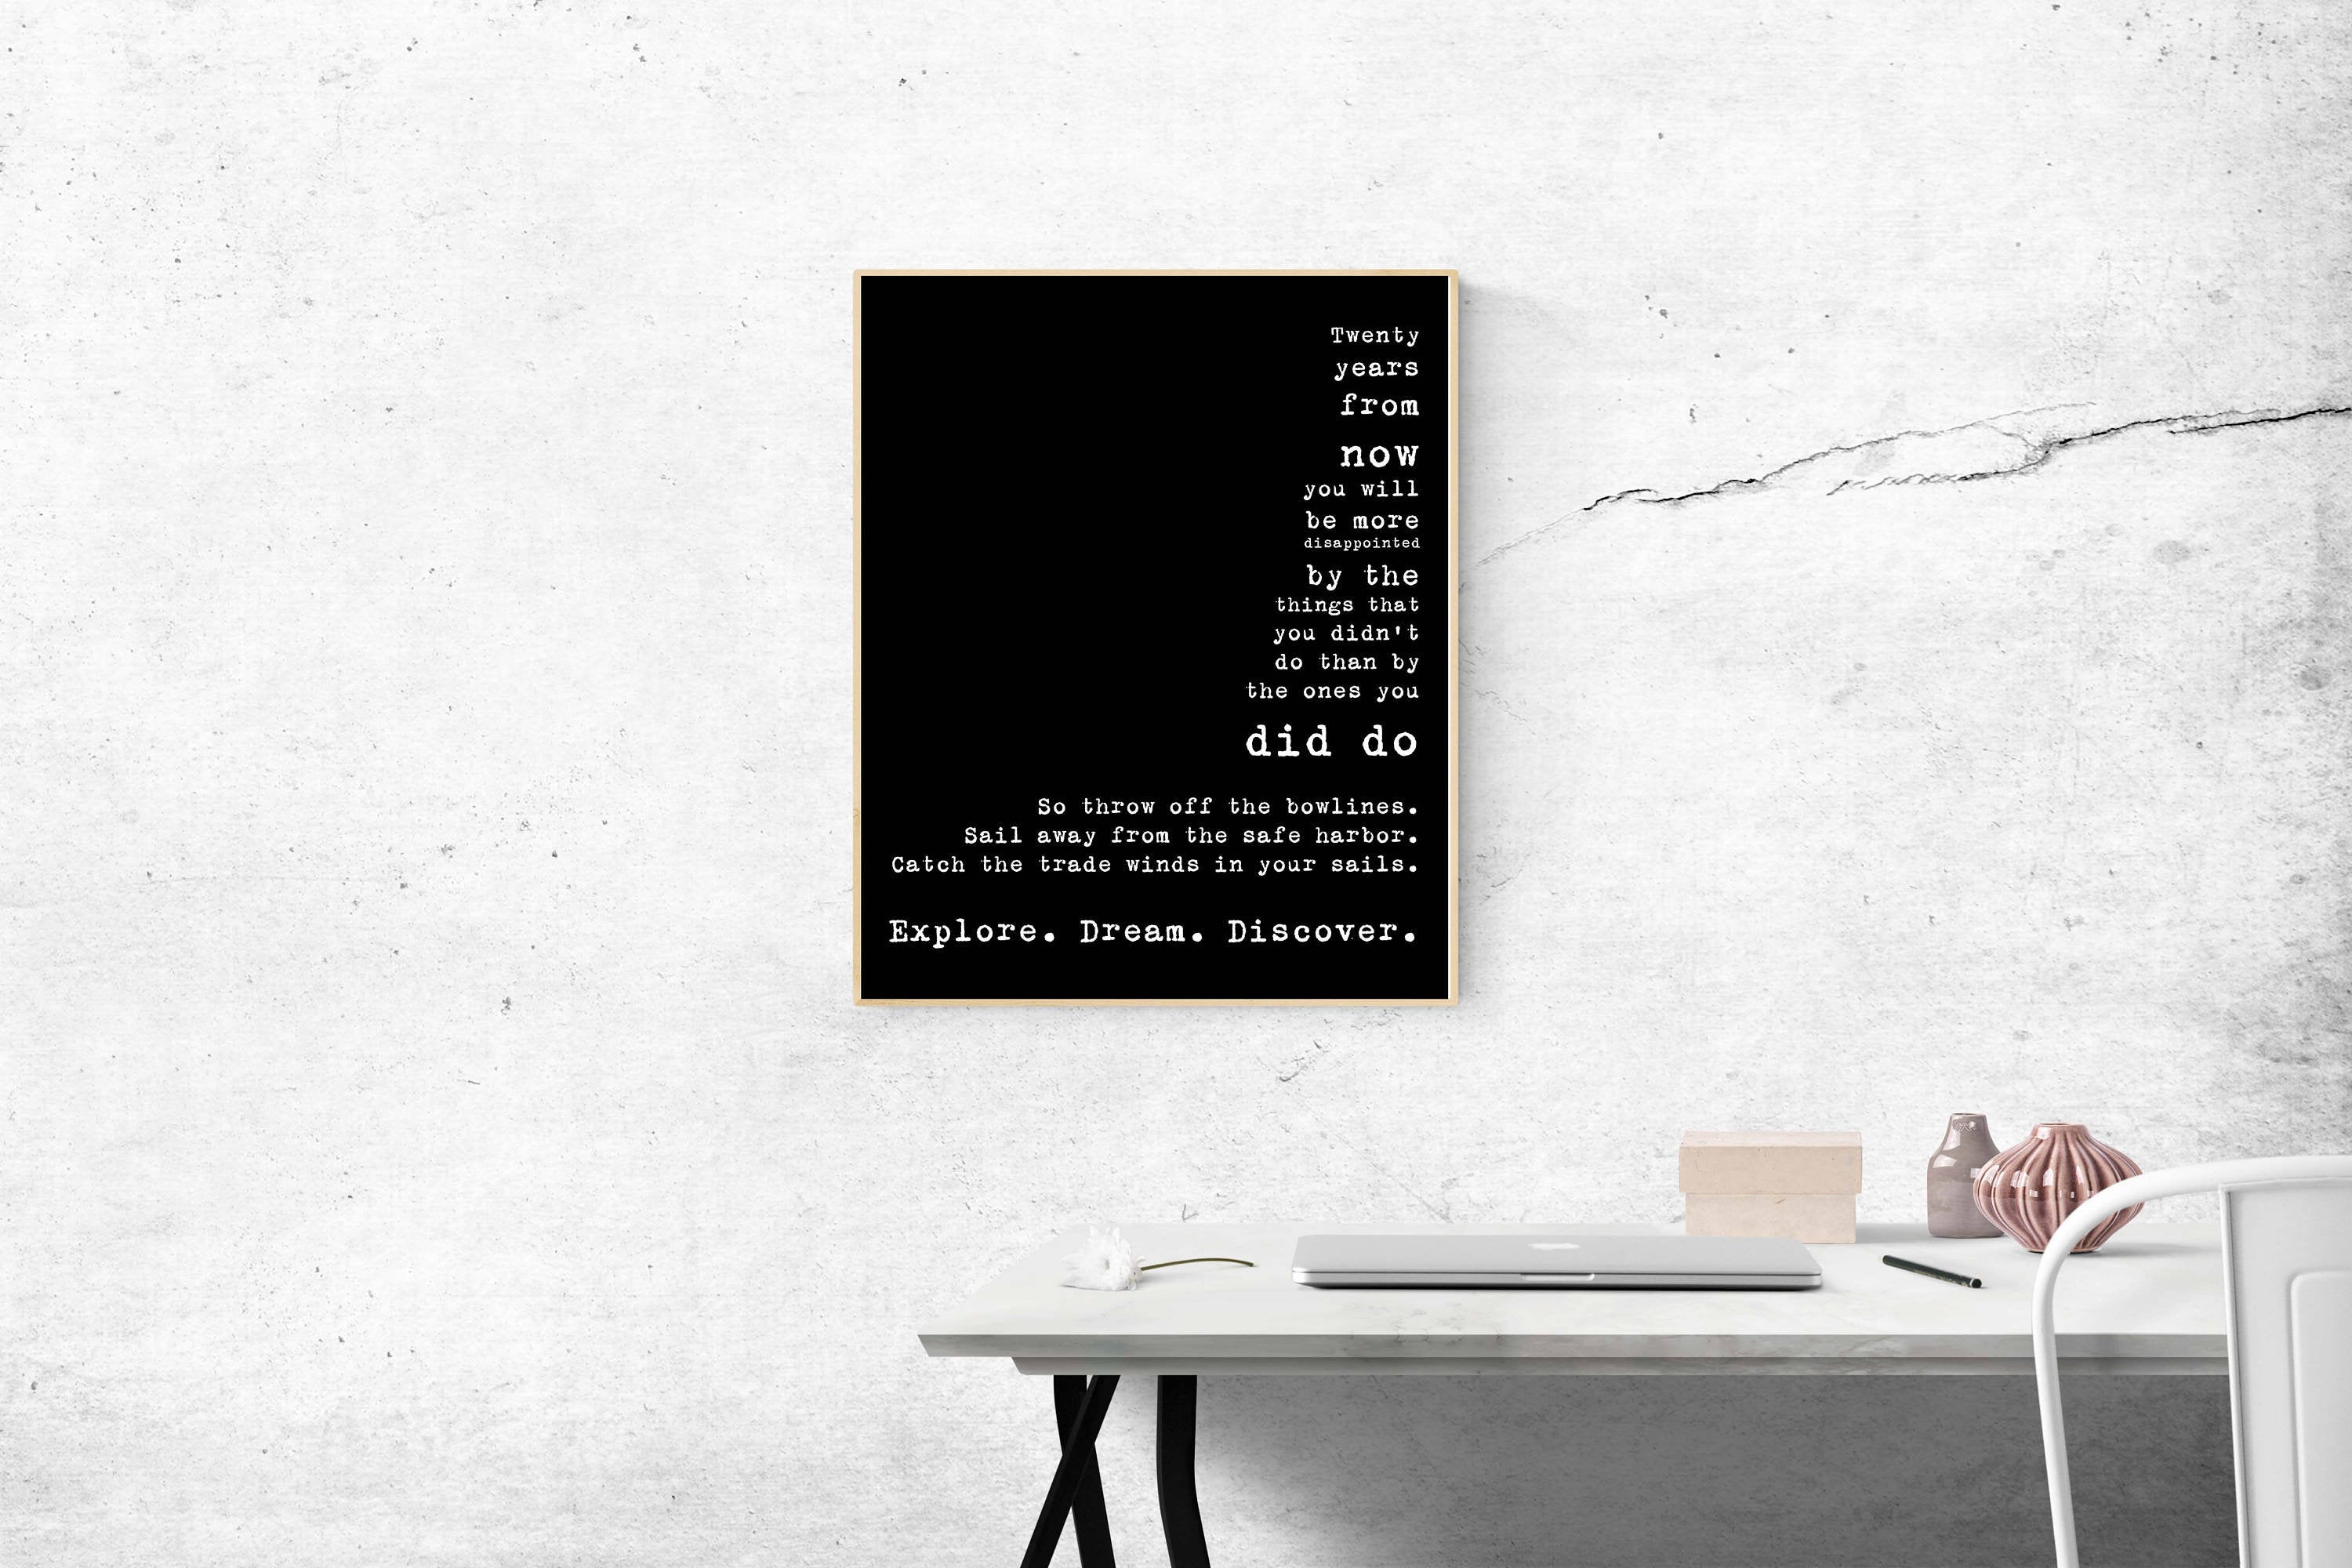 Twenty Years From Now Quote Art Print Inspirational Travel Decor, Mark Twain Explore Dream Discover in Black & White Unframed - BookQuoteDecor